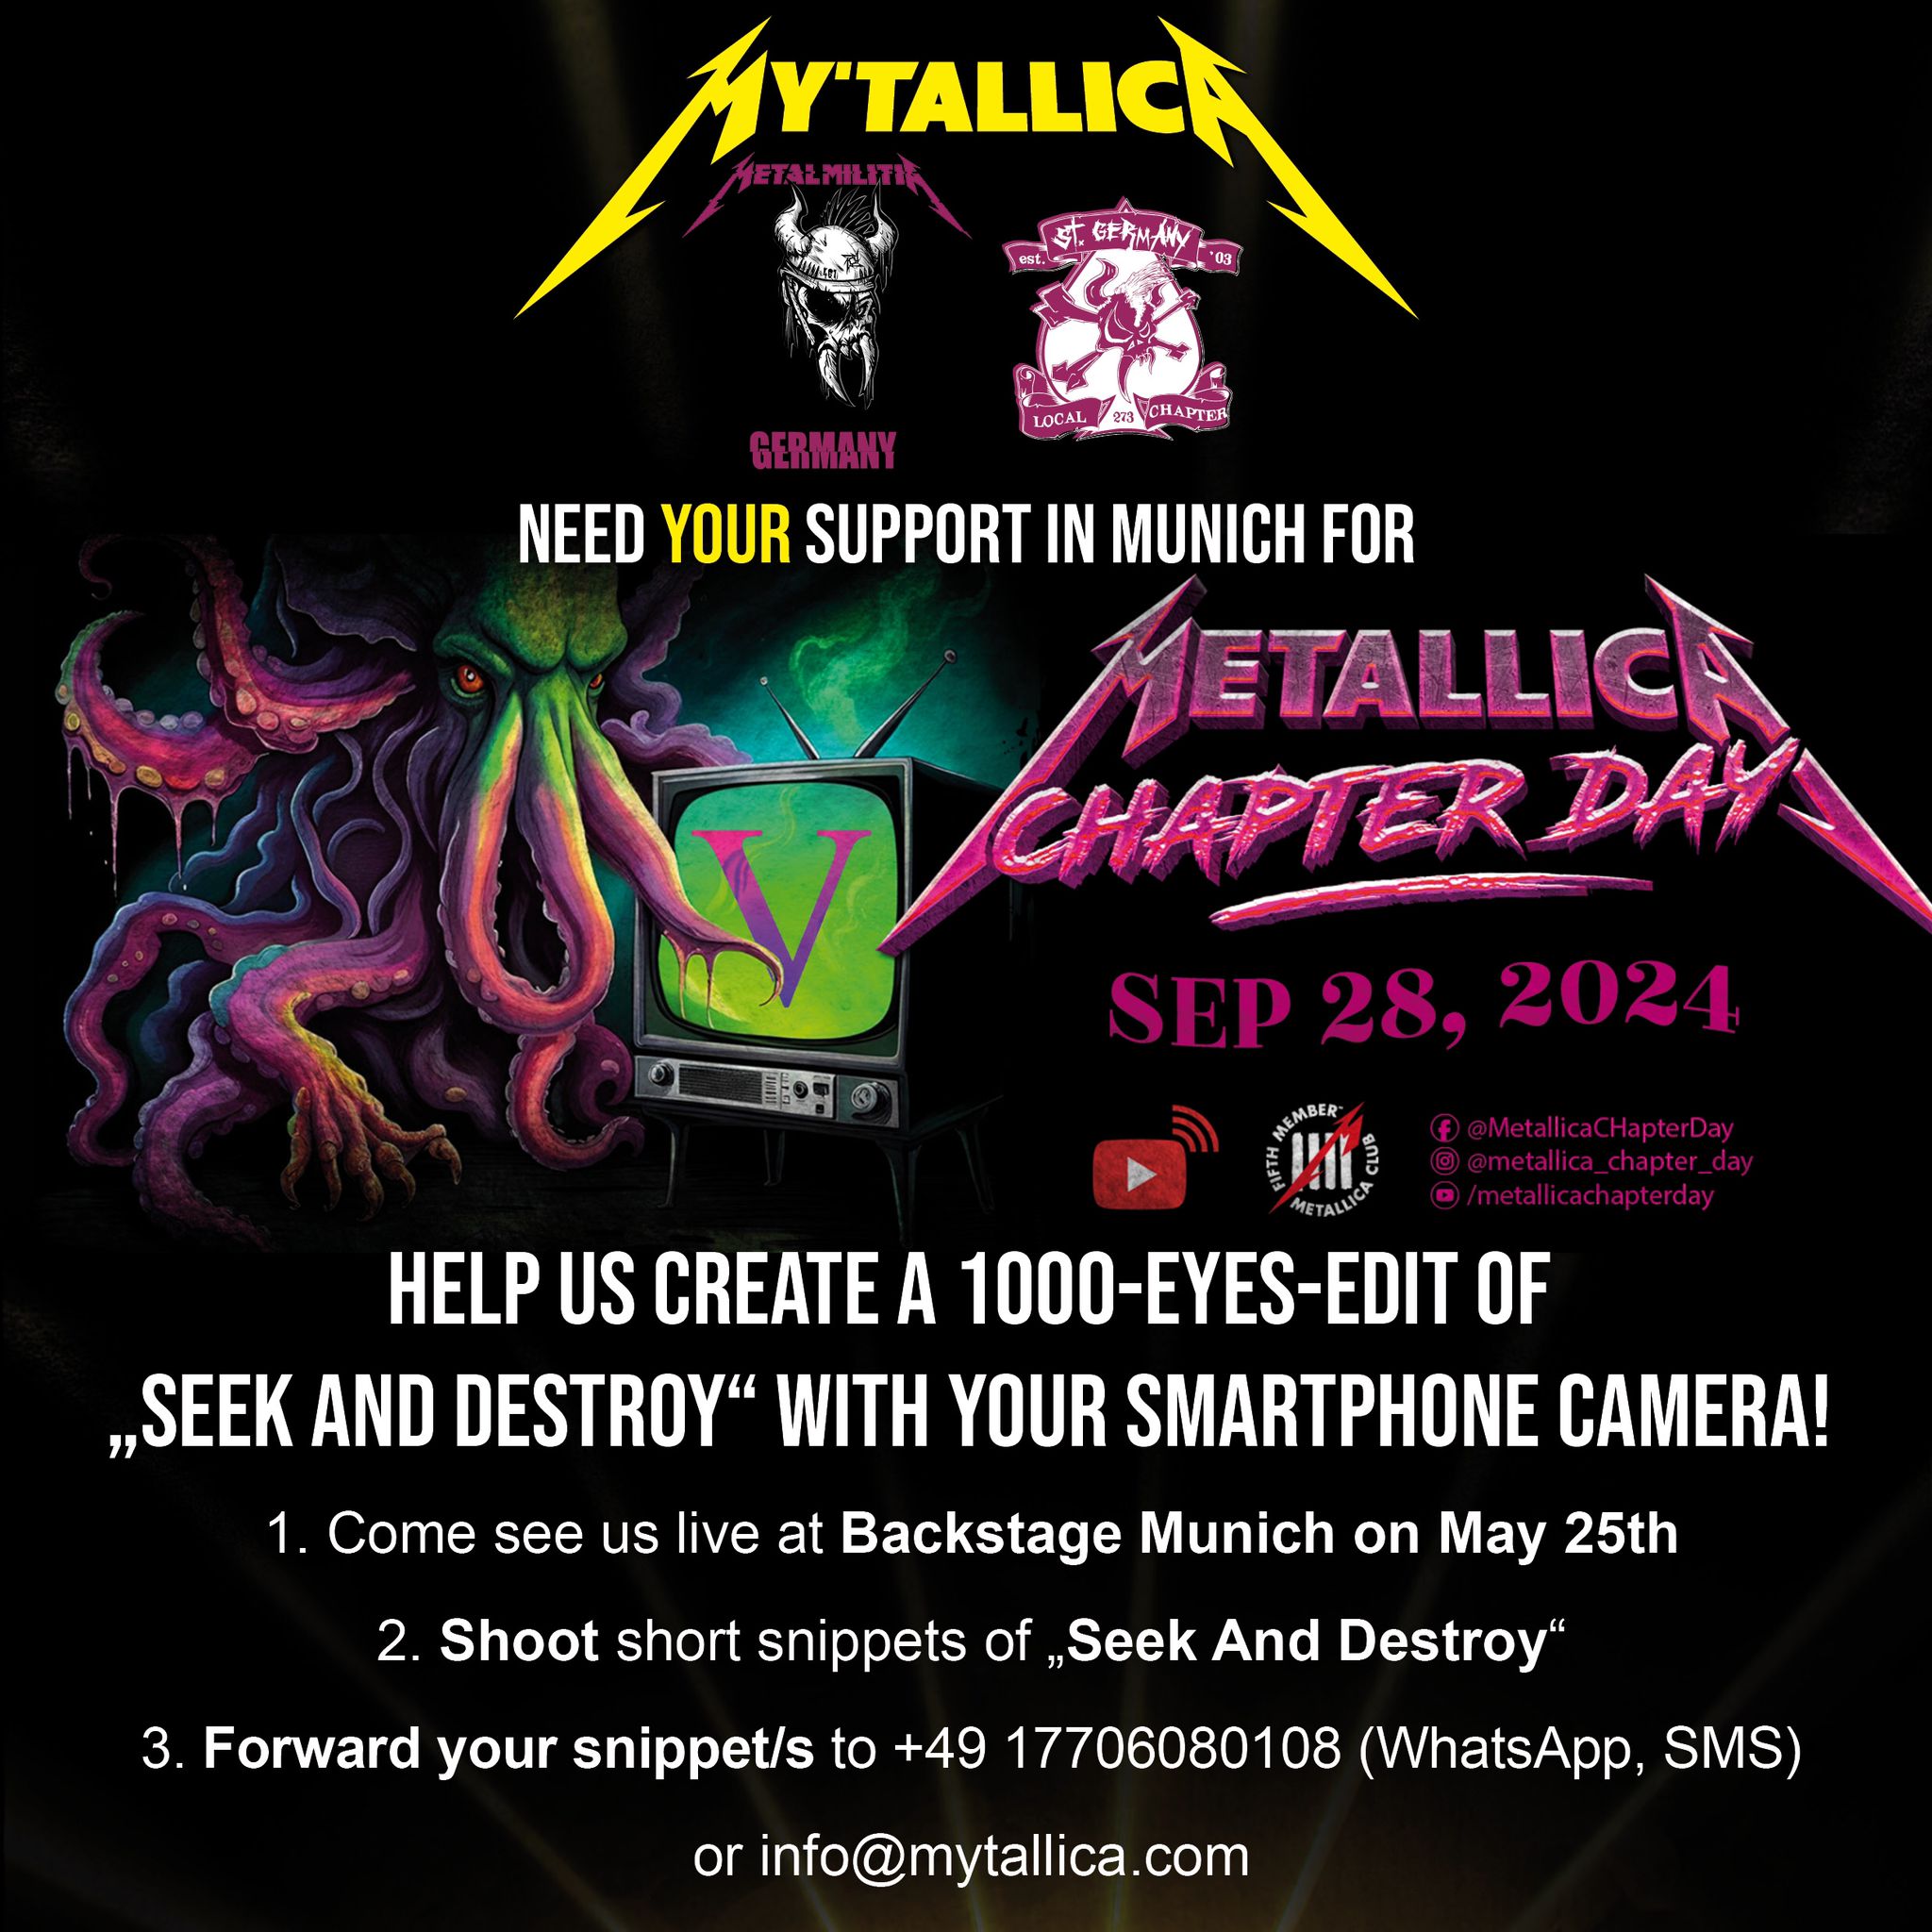 metallica-chapter-day-2024-mytallica-germany-seek-and-destroy